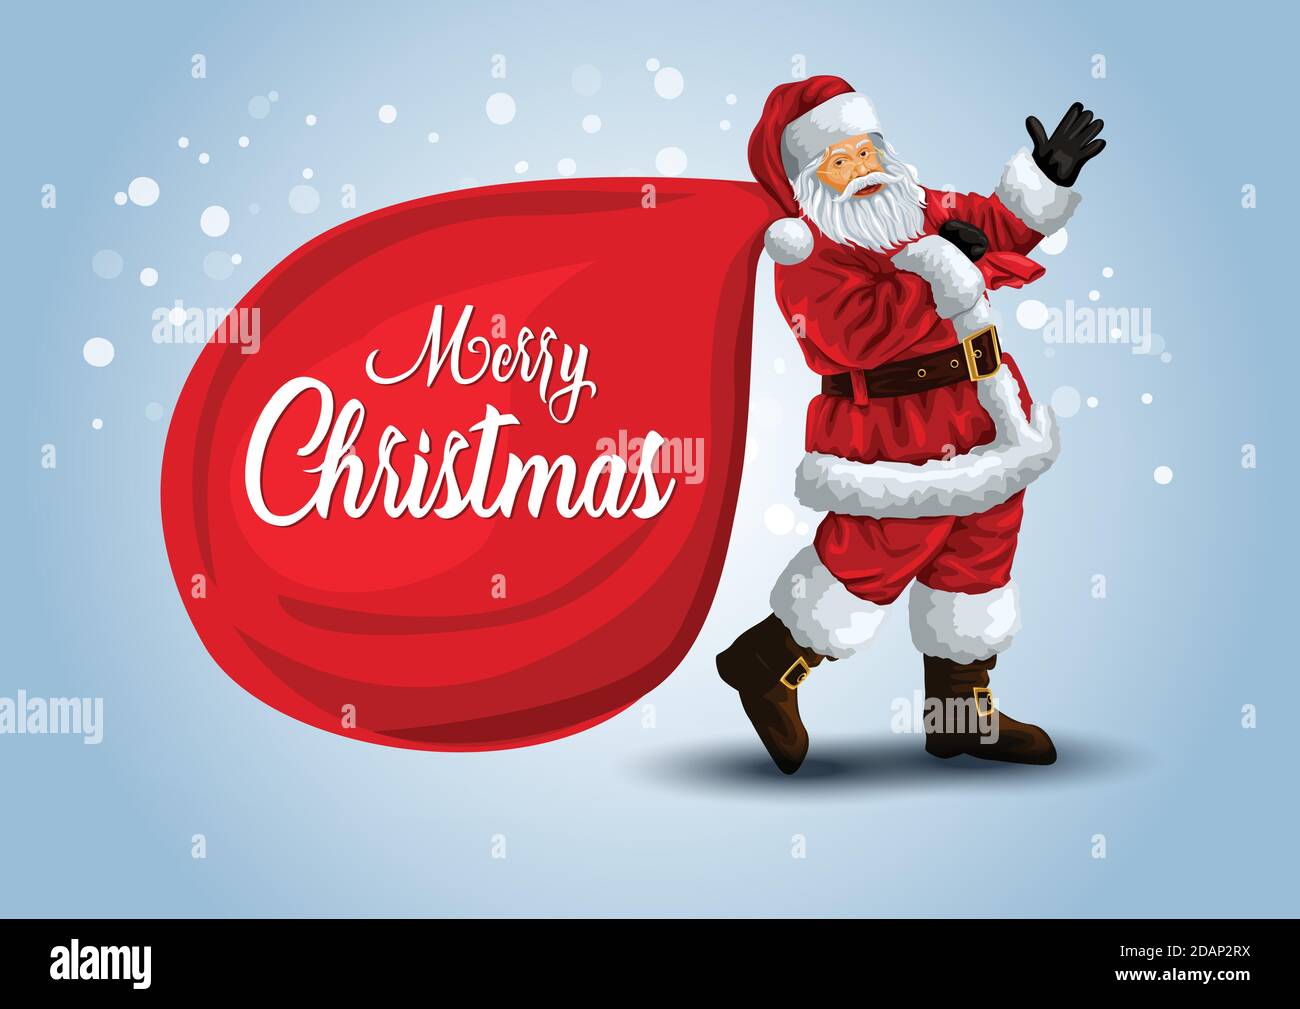 Merry Christmas poster. Santa Claus with big gift bag holding . Vector illustration. Stock Vector